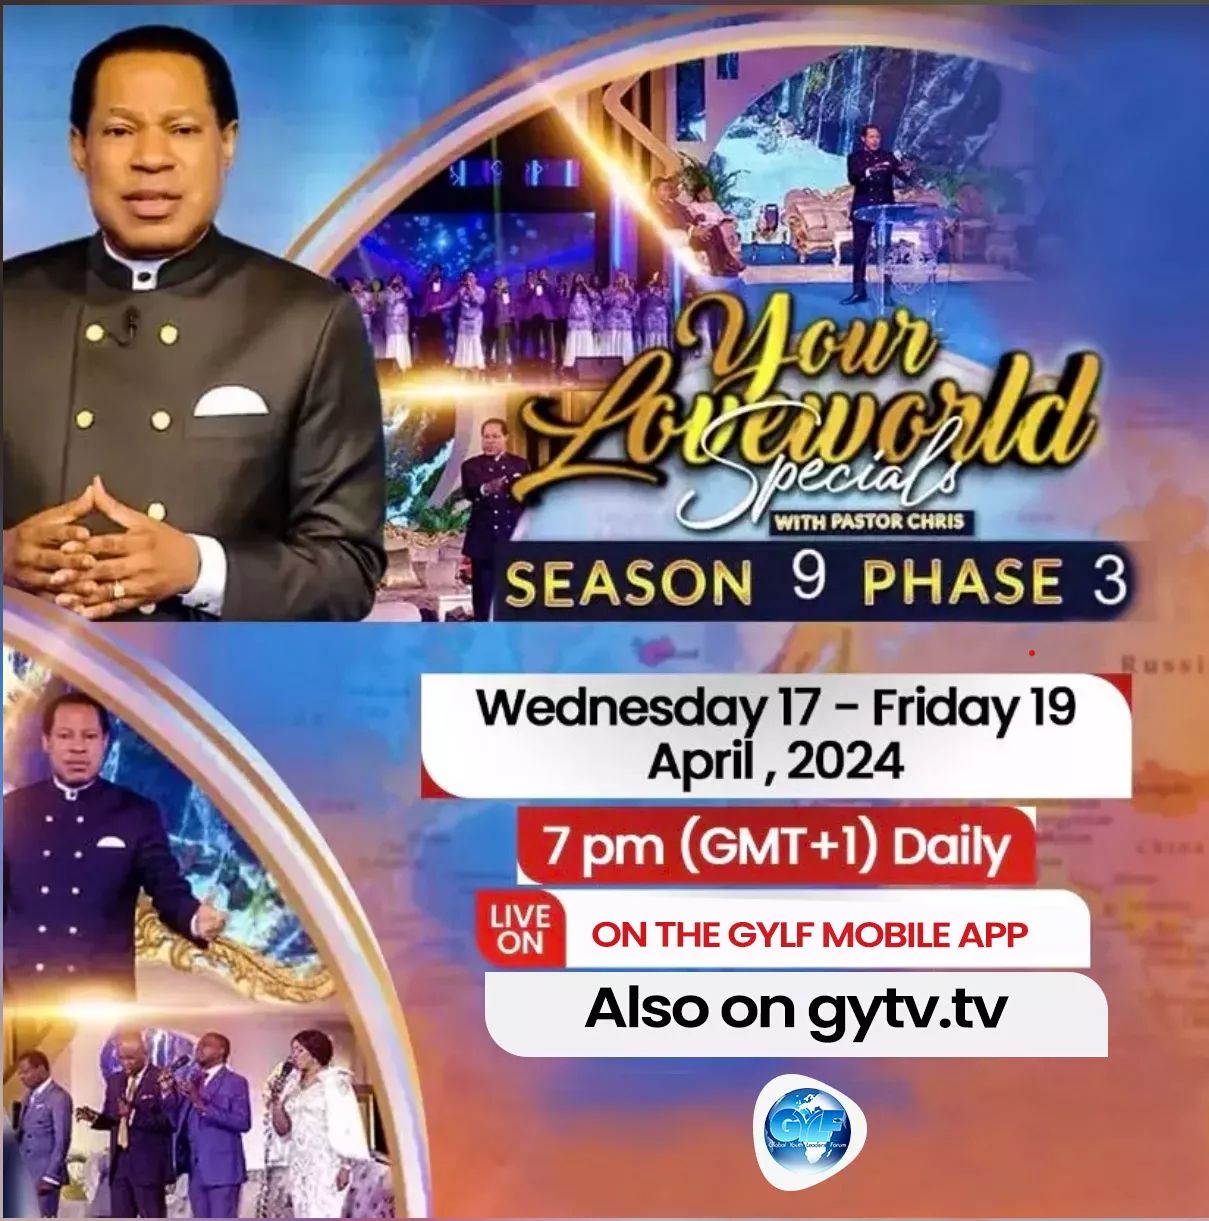 Your Loveworld Specials with Pastor Chris Season 9 Phase 3